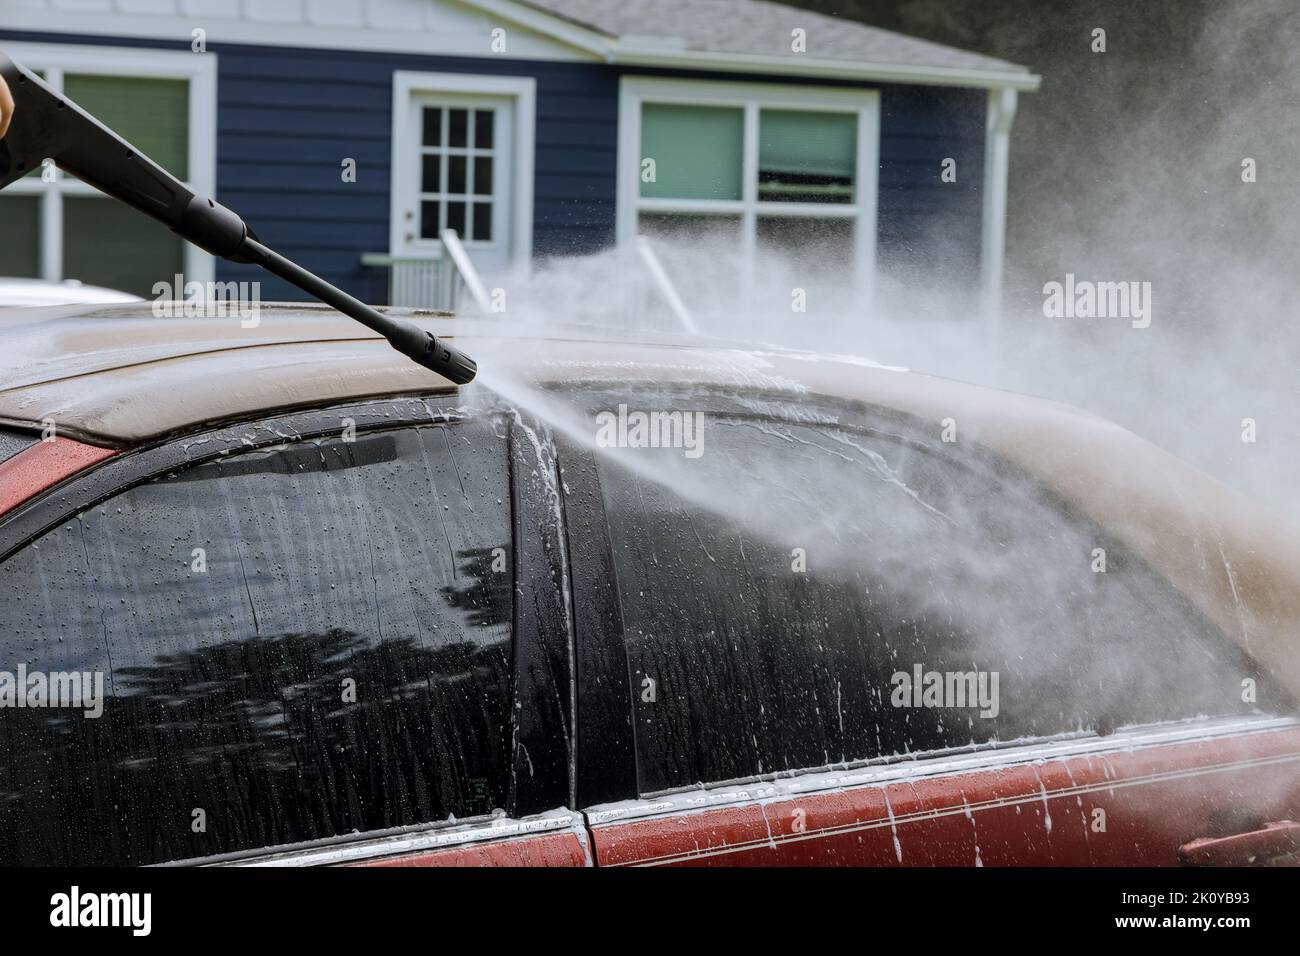 Man is washing his car under the high pressure jet spraying water with the purpose of cleaning the car Stock Photo